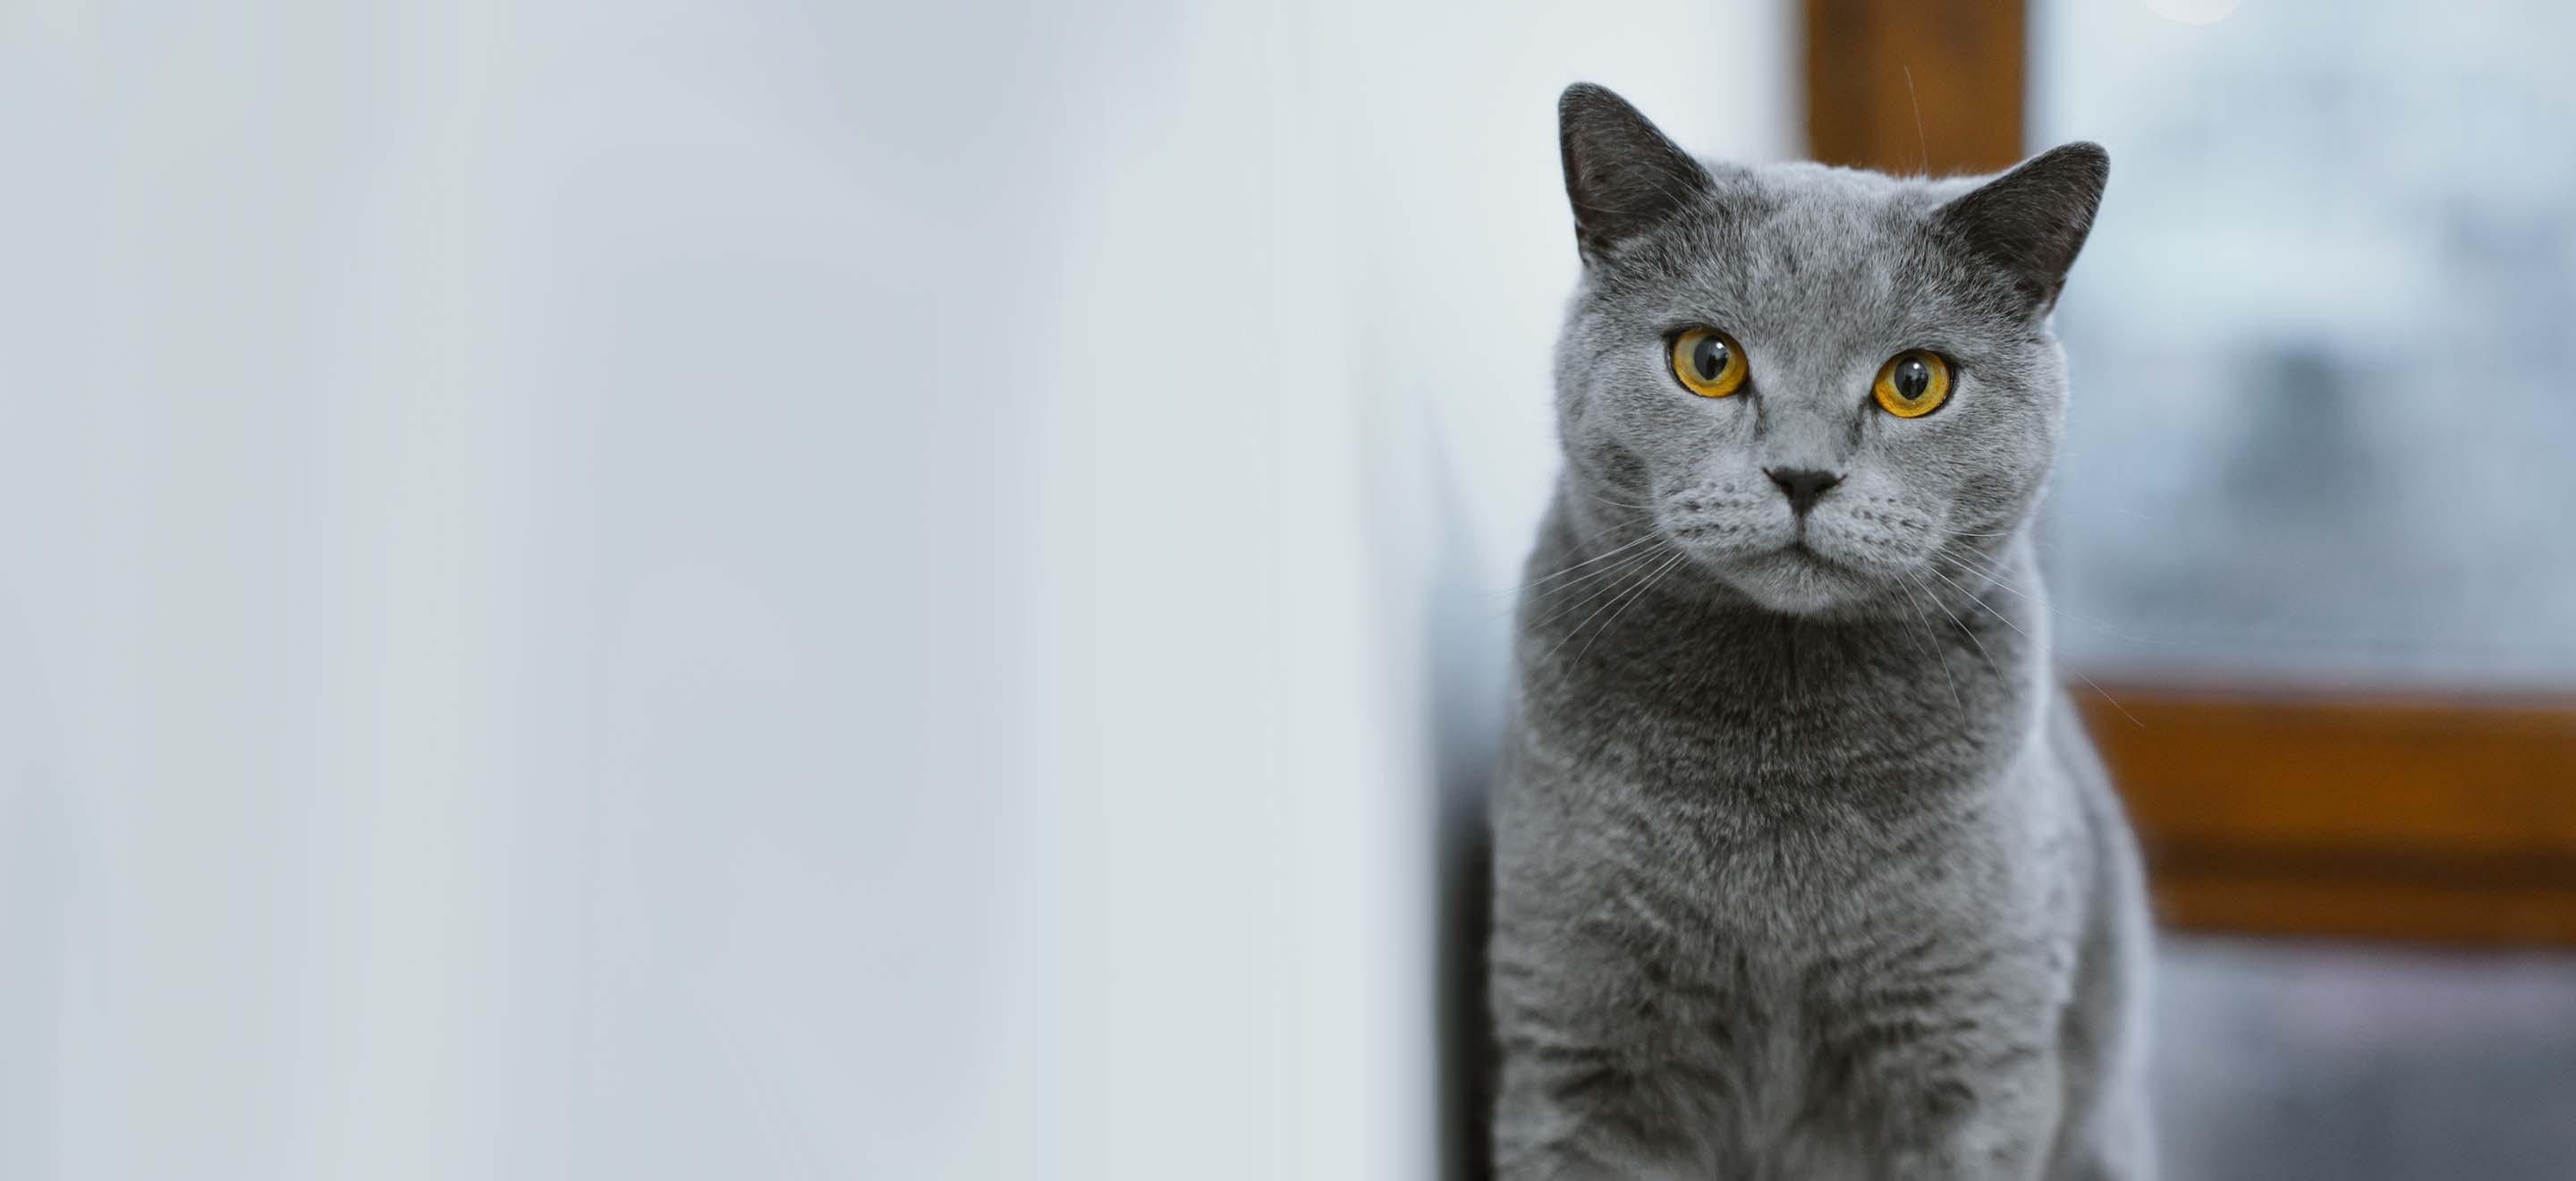 Gray British Shorthair cat with yellow eyes looking at the camera leaning against the wall image